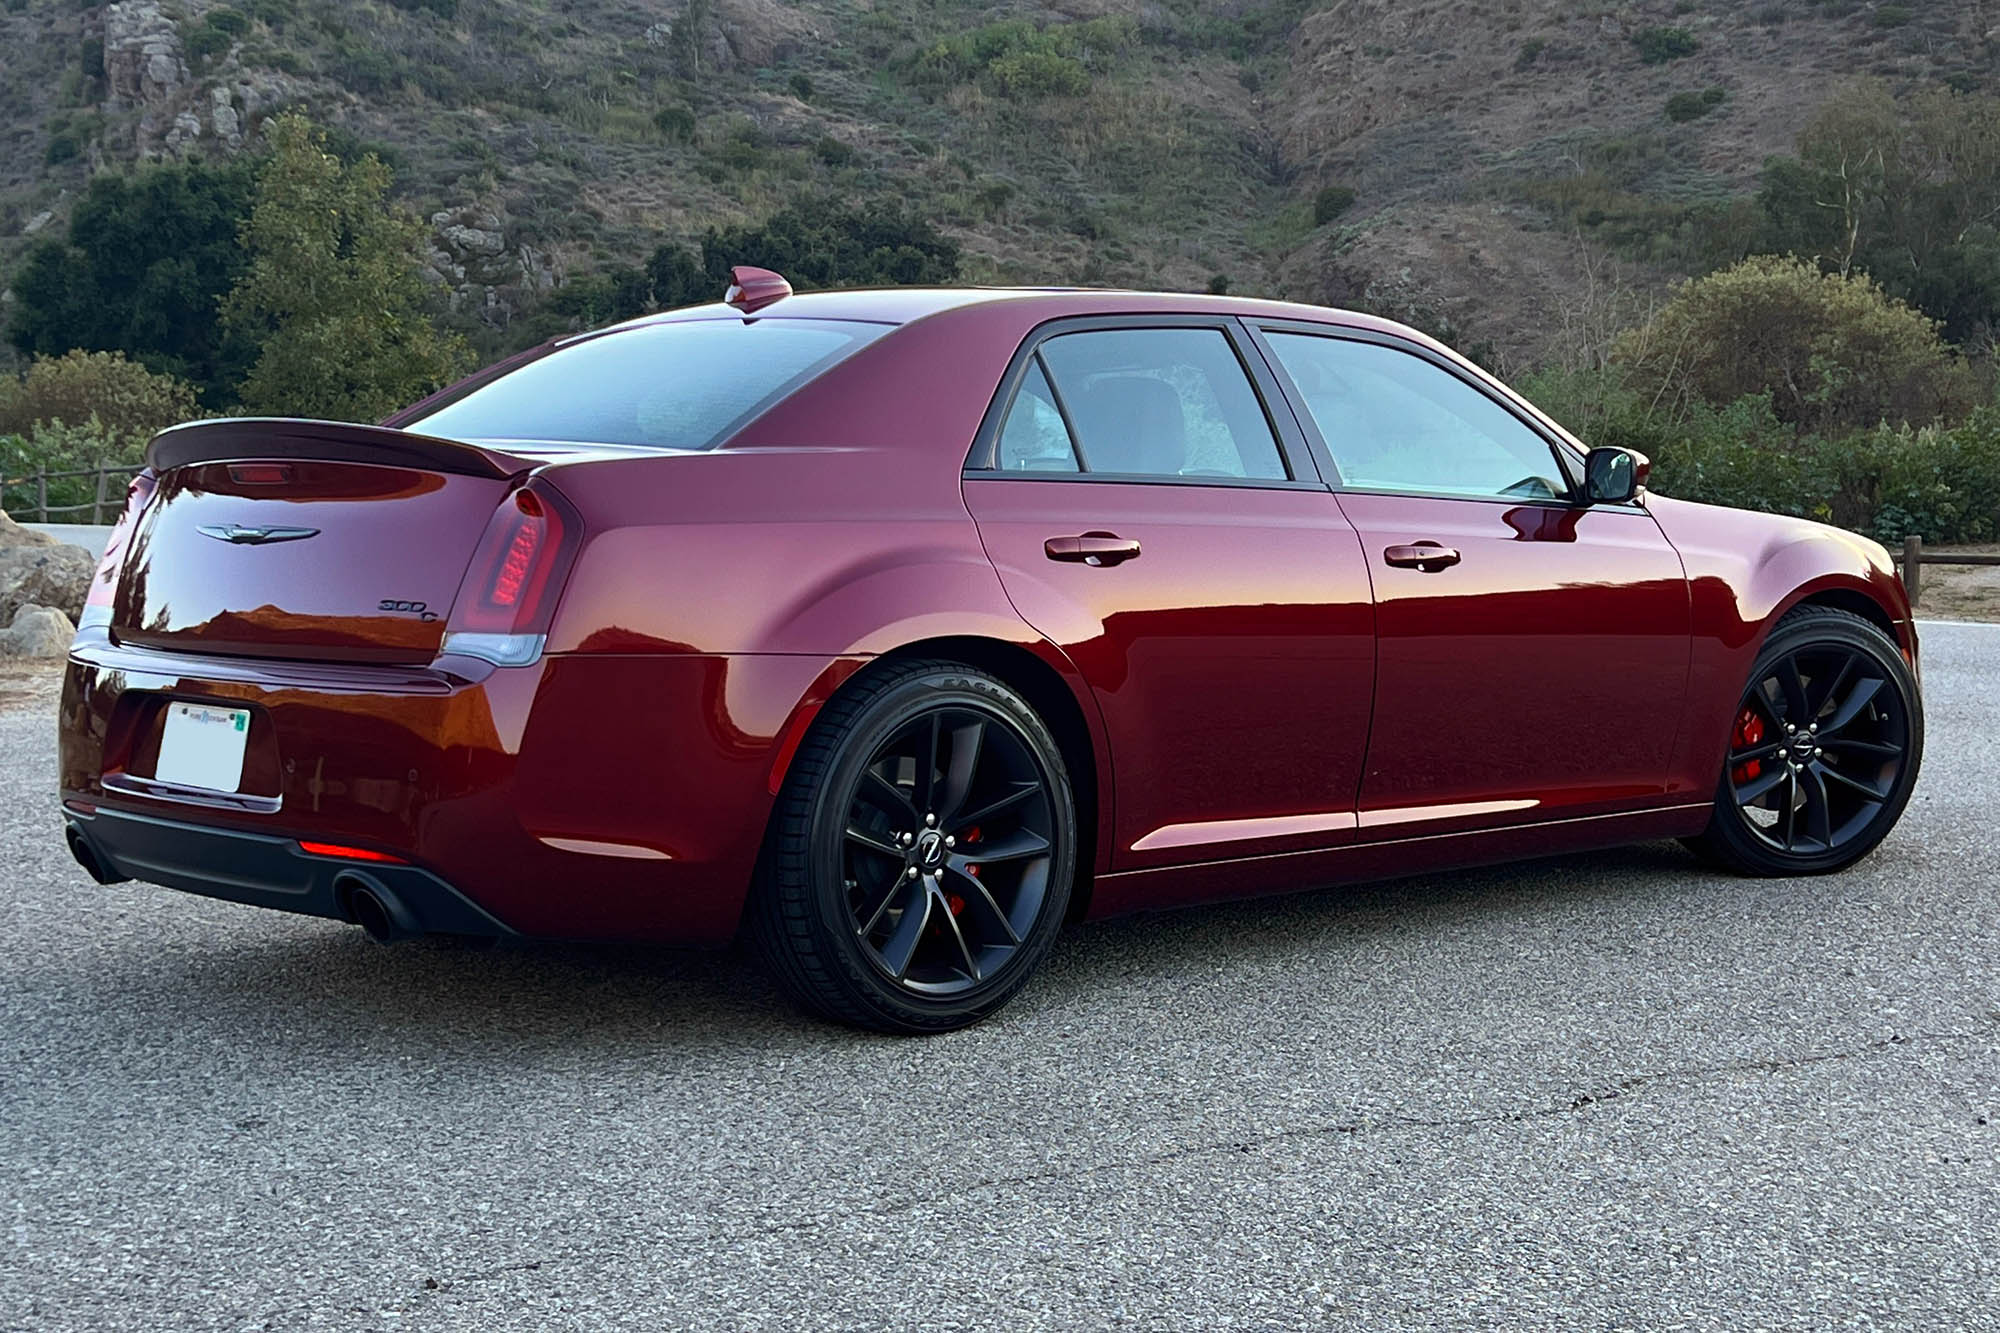 Right rear quarter view of a red 2023 Chrysler 300